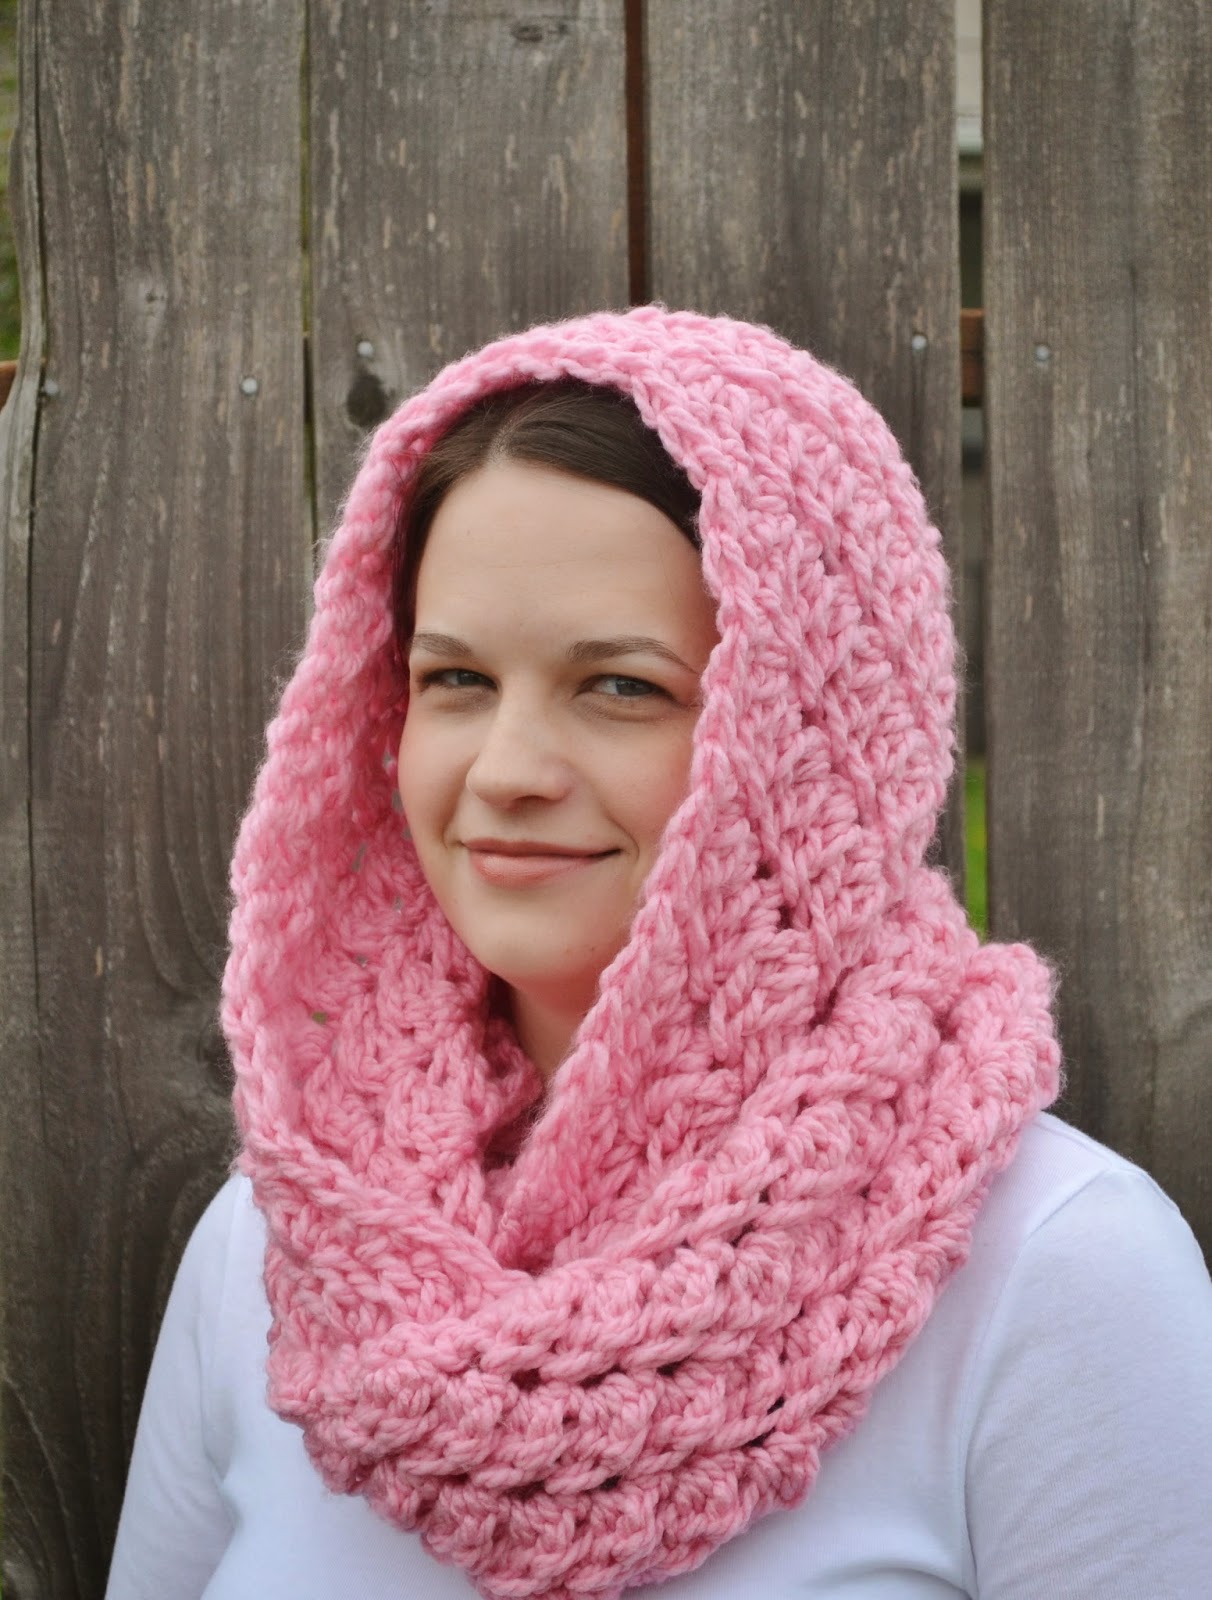 The Sequin Turtle: Free Crochet Hooded Infinity Scarf Pattern